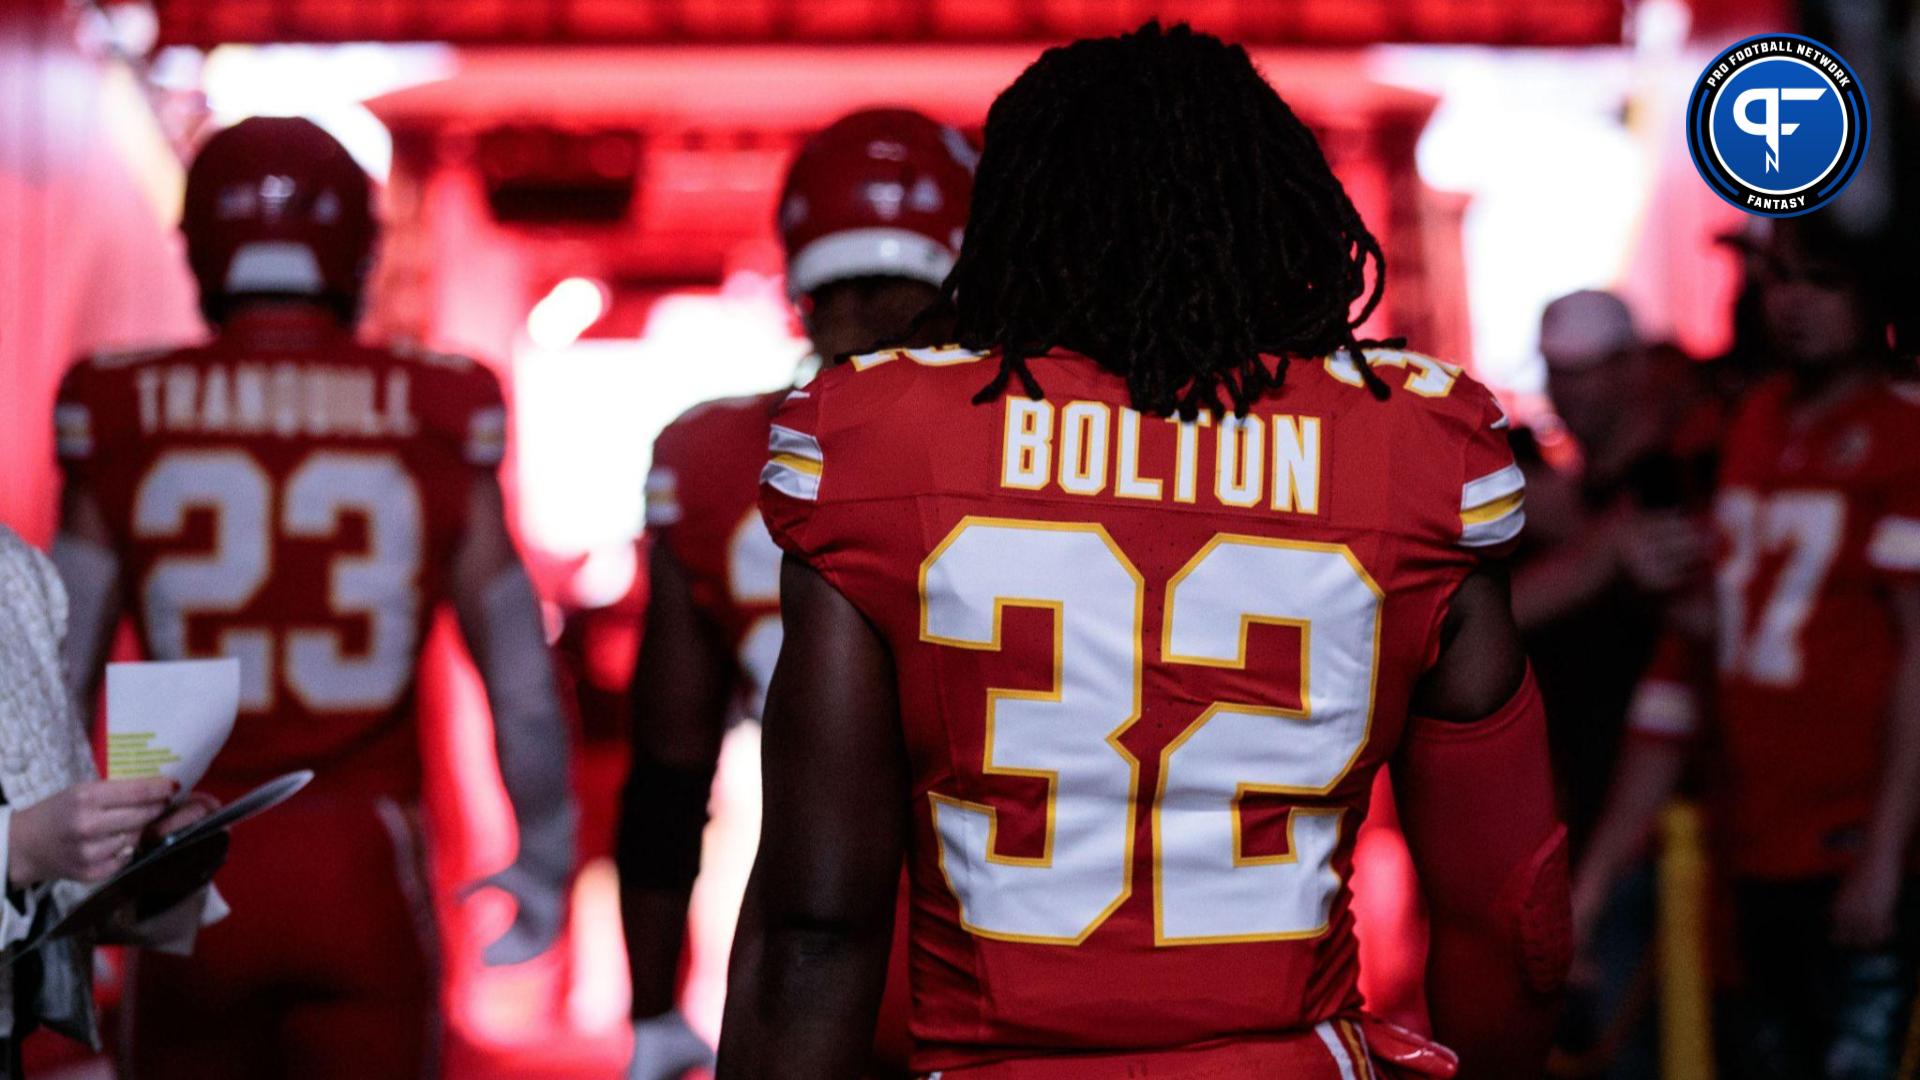 Kansas City Chiefs linebacker Nick Bolton (32) enters the field prior to the game against the Denver Broncos at GEHA Field at Arrowhead Stadium.